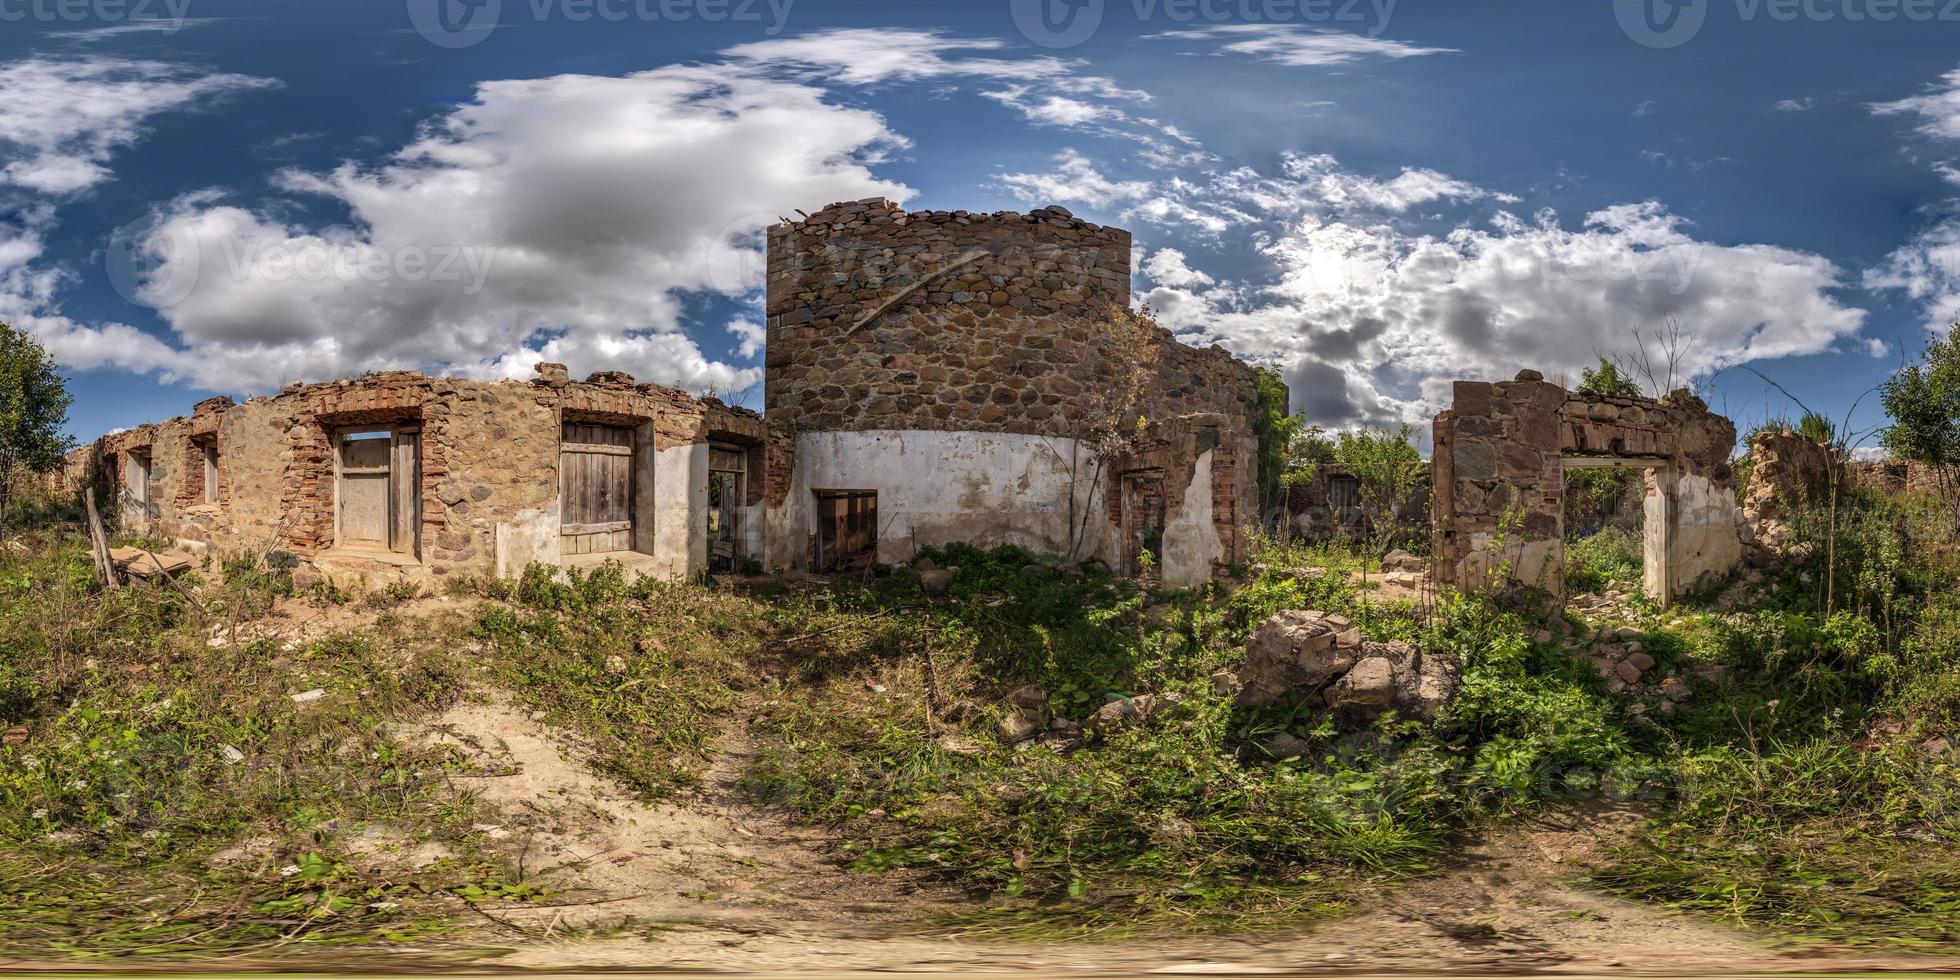 360 hdri panorama inside abandoned ruined bushy concrete decaying old building without roof in full seamless spherical hdri panorama in equirectangular projection, AR VR virtual reality content photo